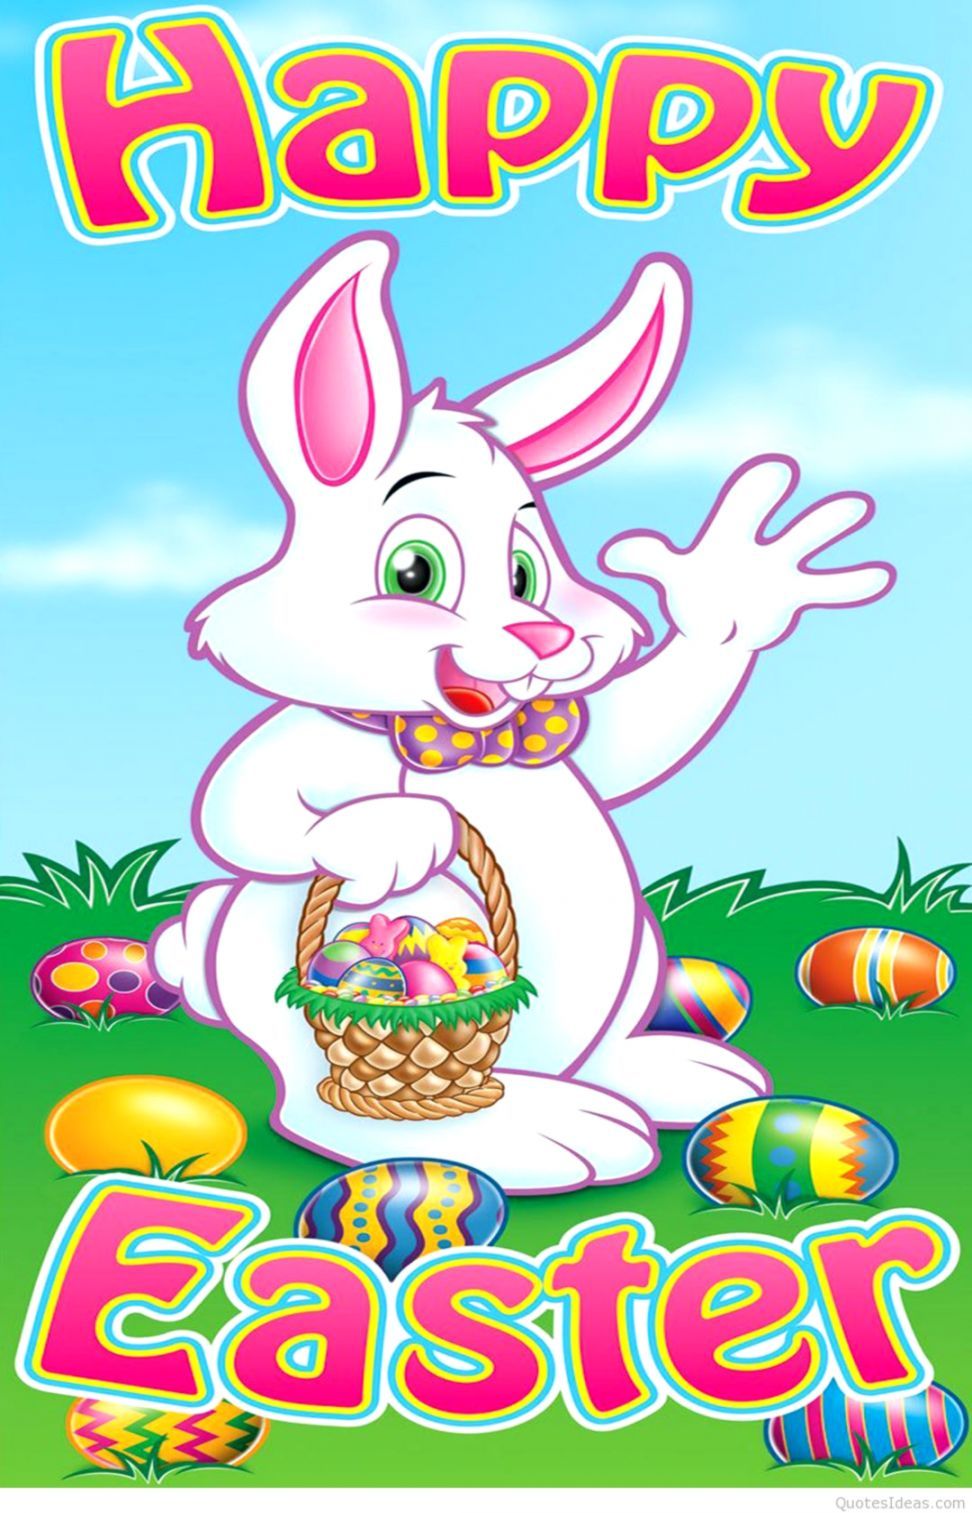 Happy Easter Wallpaper Quote. Wallpaper Background Gallery